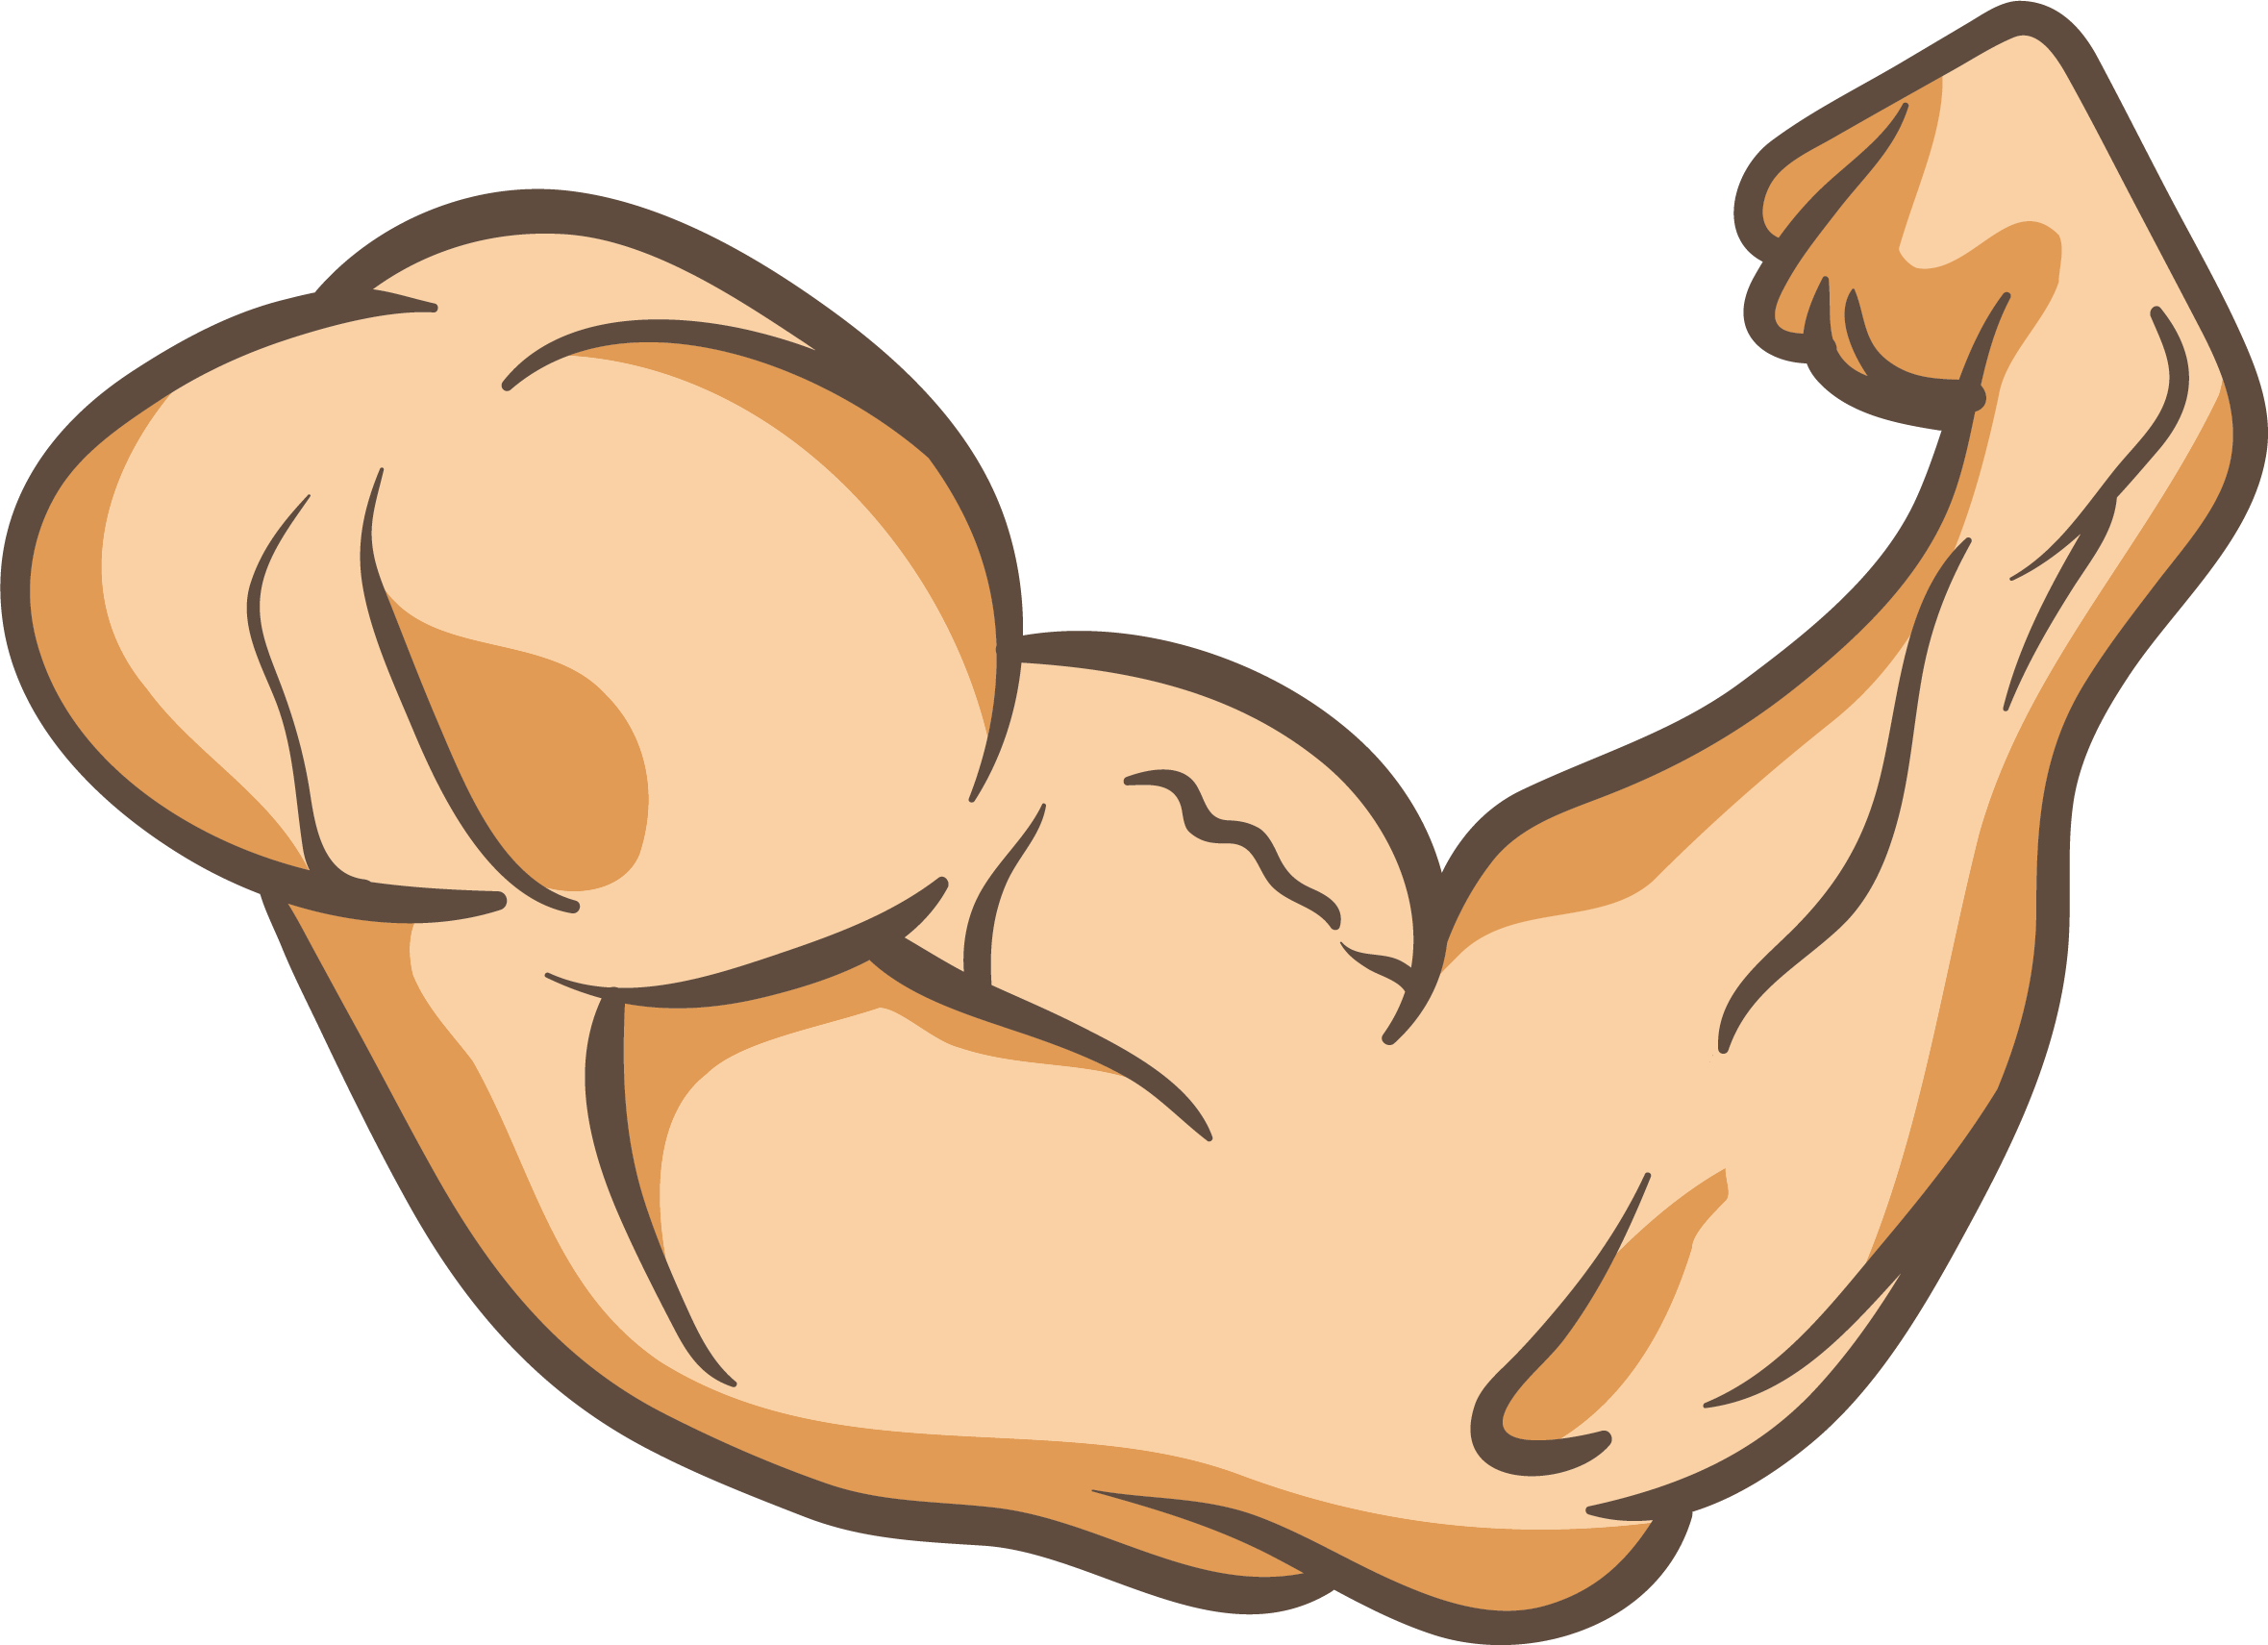 https://www.pngfind.com/pngs/b/40-403090_arms-thumb-muscle-clip-art-a-powerful-arm.png